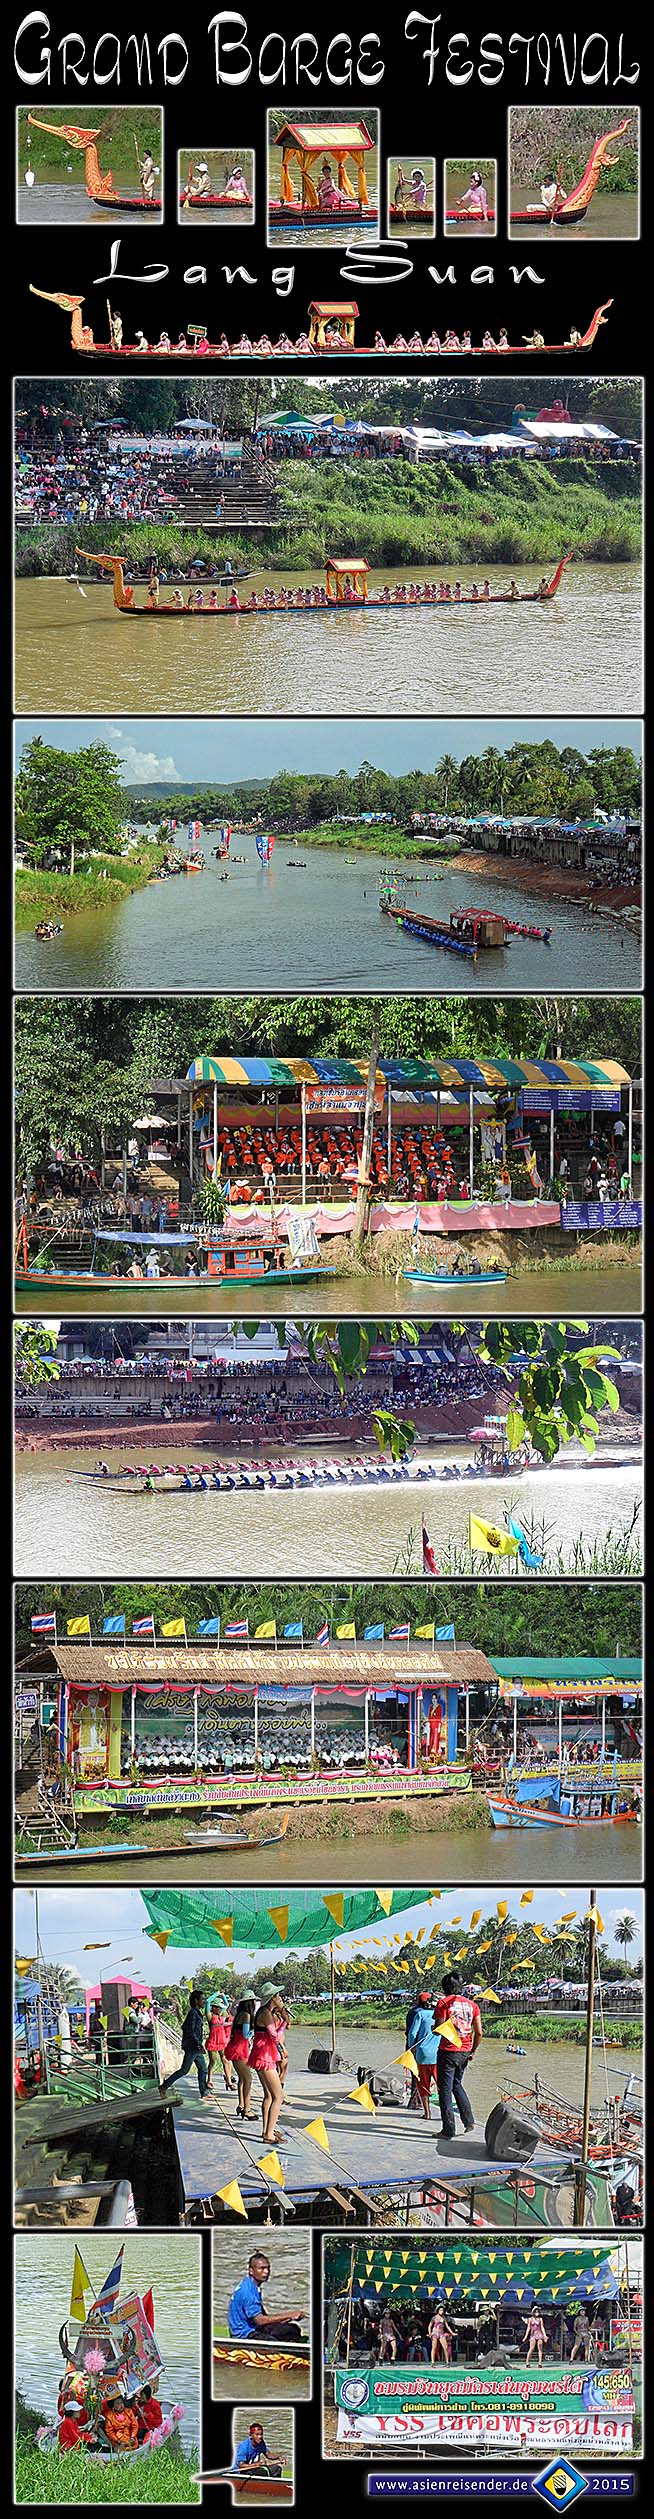 Photocomposition 'Barge Festival in Lang Suan 2012' by Asienreisender